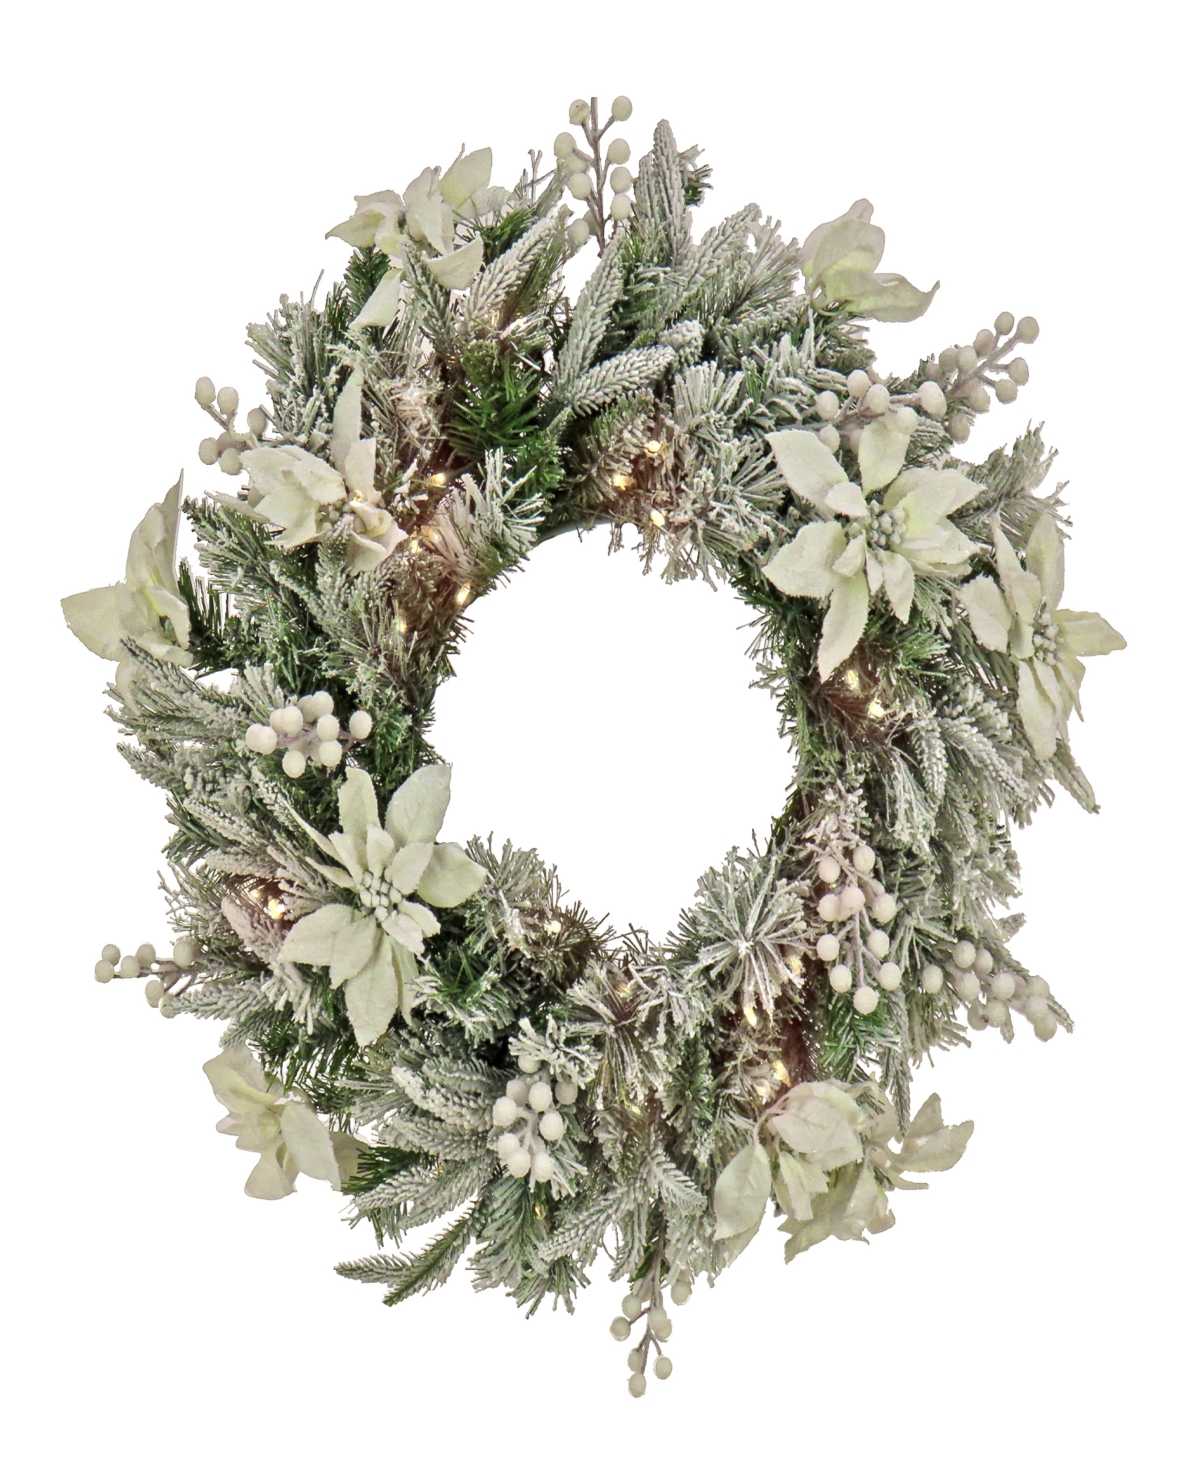 26" Frosted Colonial Wreath with Led Lights - Green